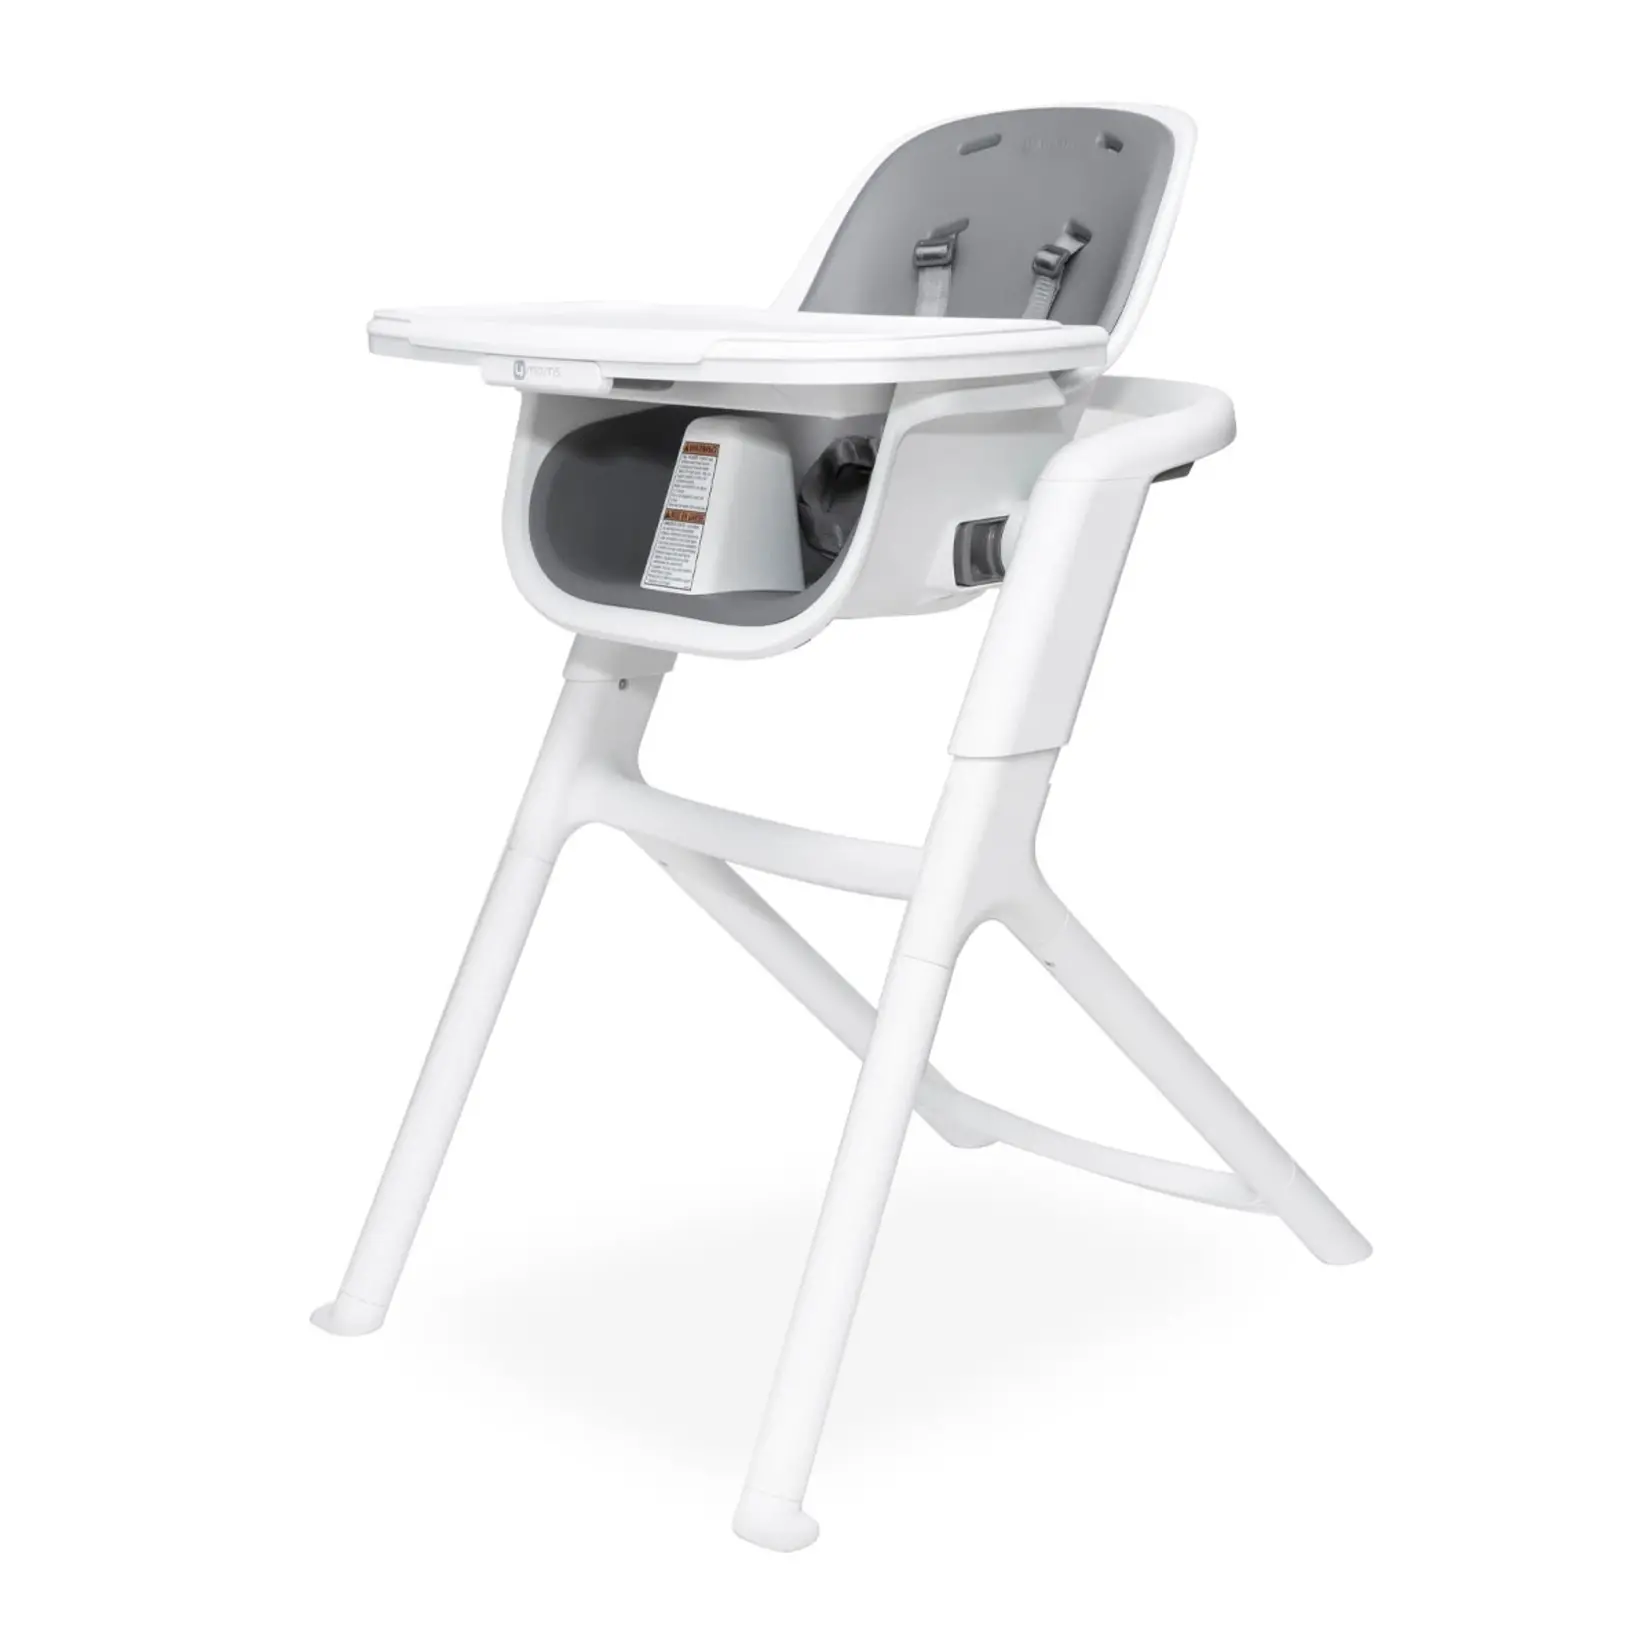 4Moms 4MOMS CONNECT HIGH CHAIR